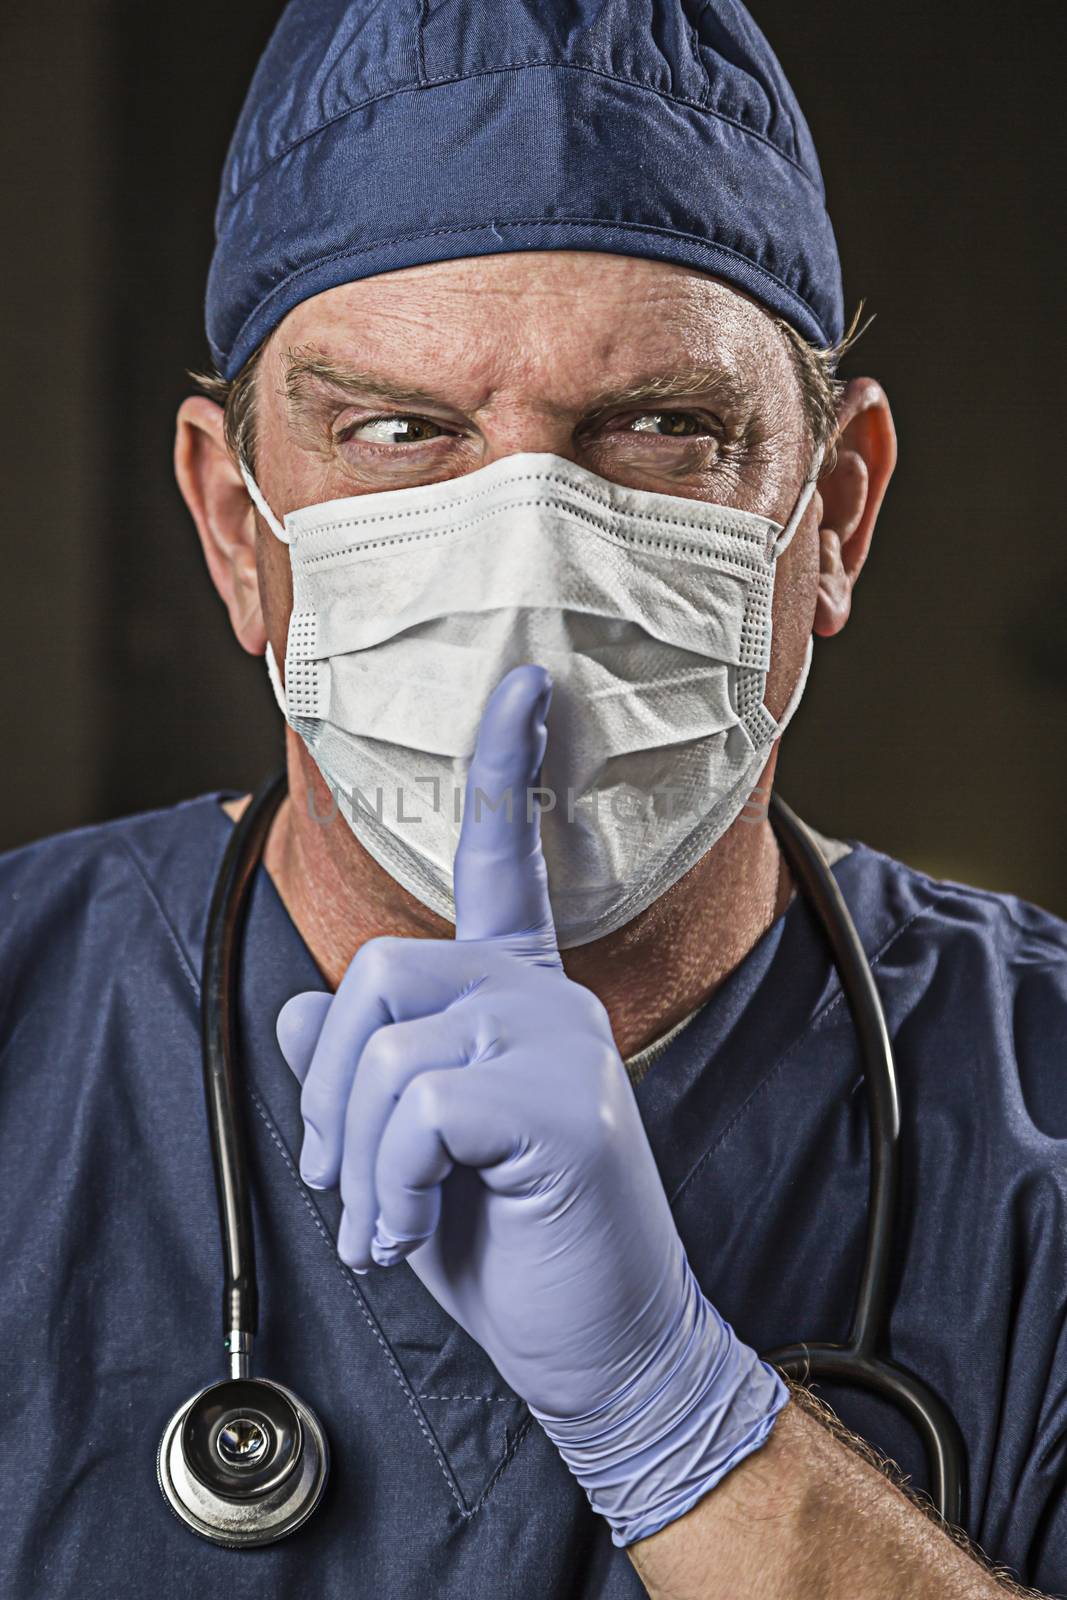 Secretive Doctor or Nurse With Finger in Front of Mouth wearing Protective Wear and Stethoscope.